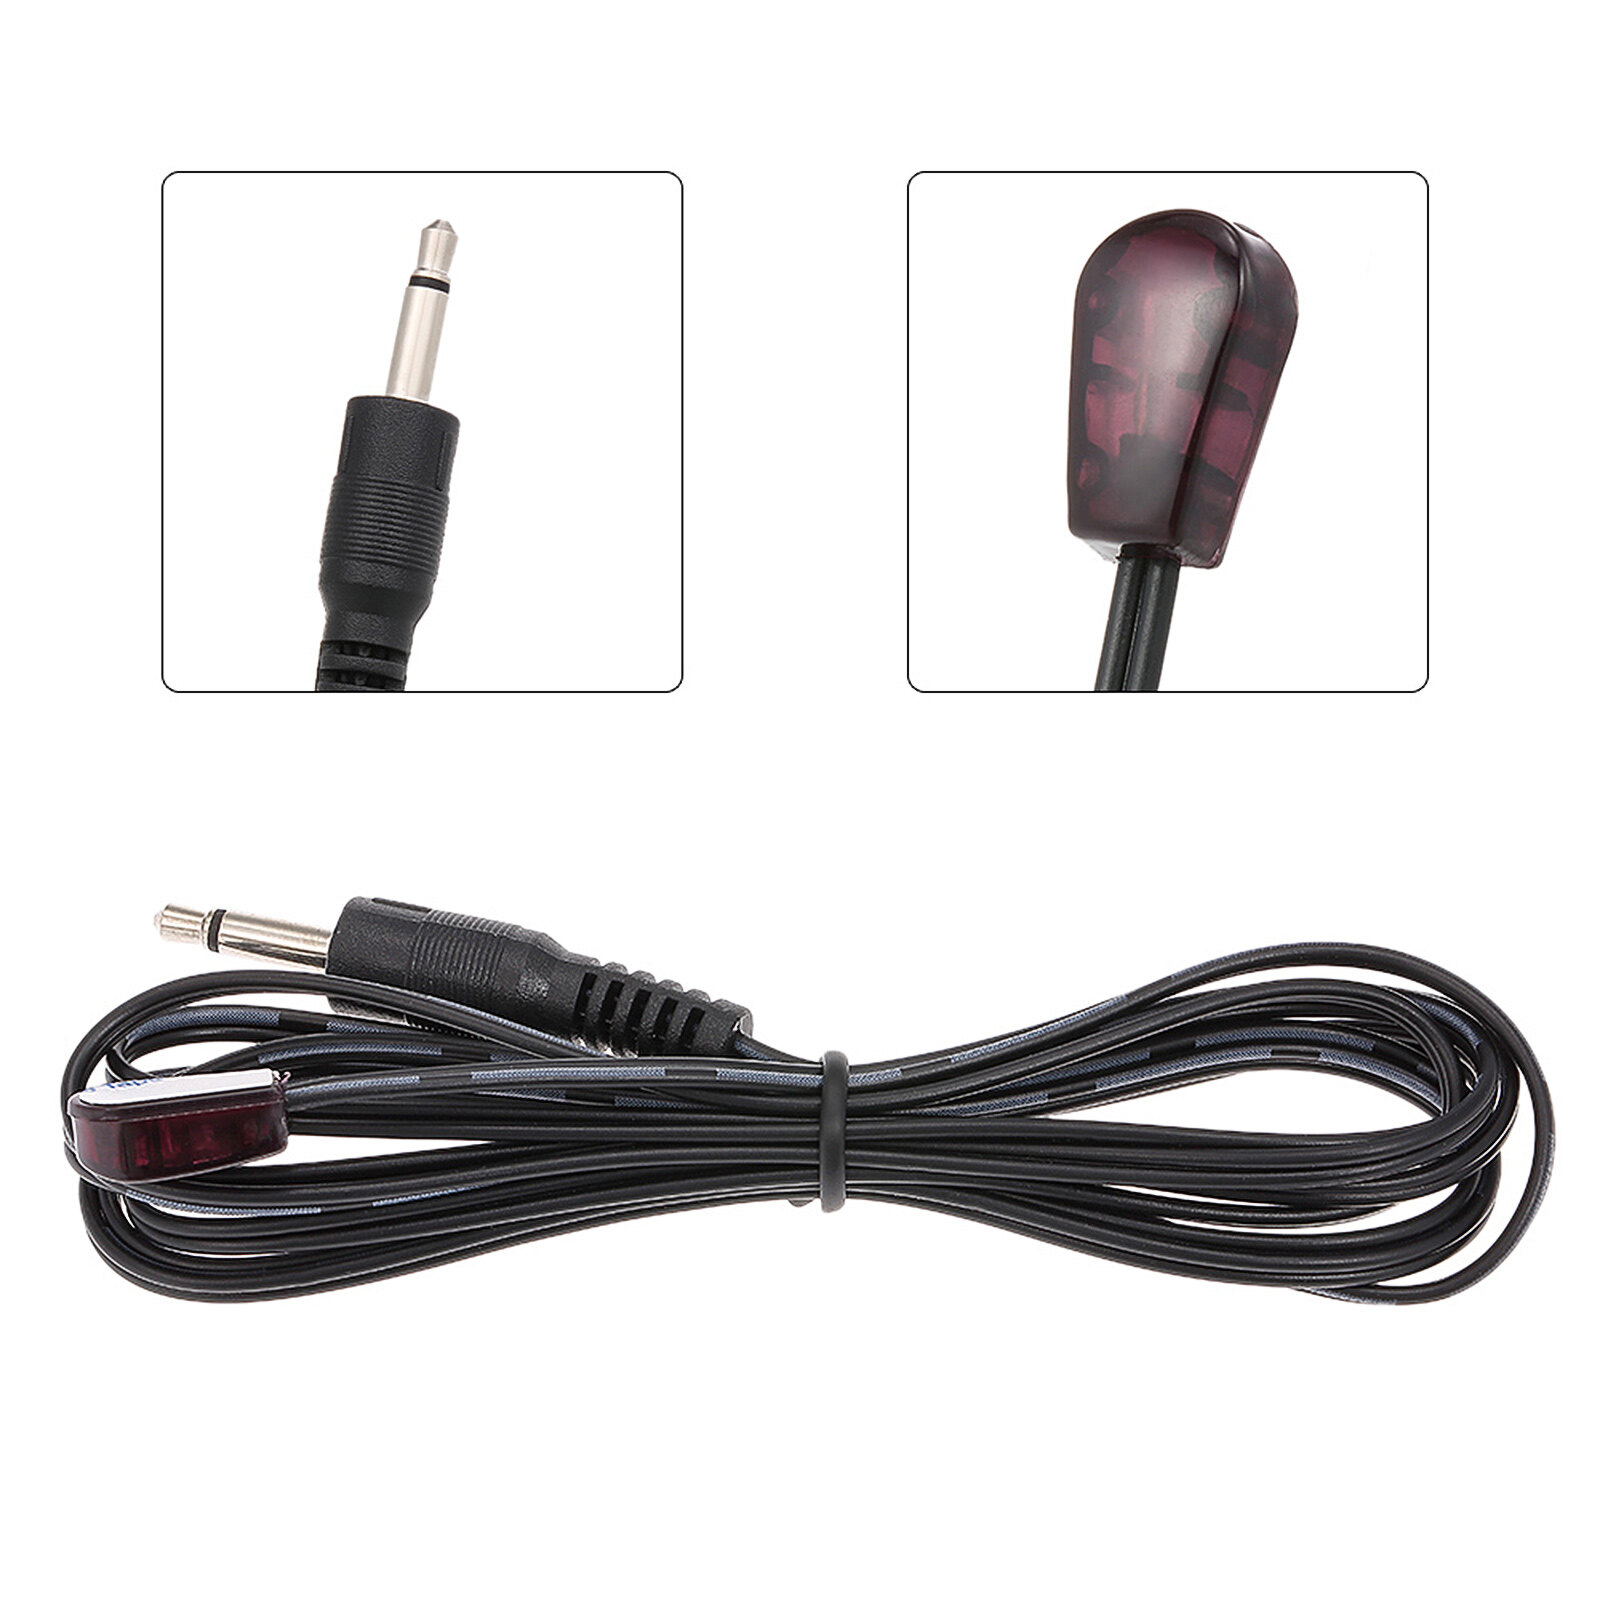 CHF03-2 3.0m/10ft IR Emitter Extension Cable Durable Emission Lines Remote Control Extender Wire Cord with 3.5mm Jack